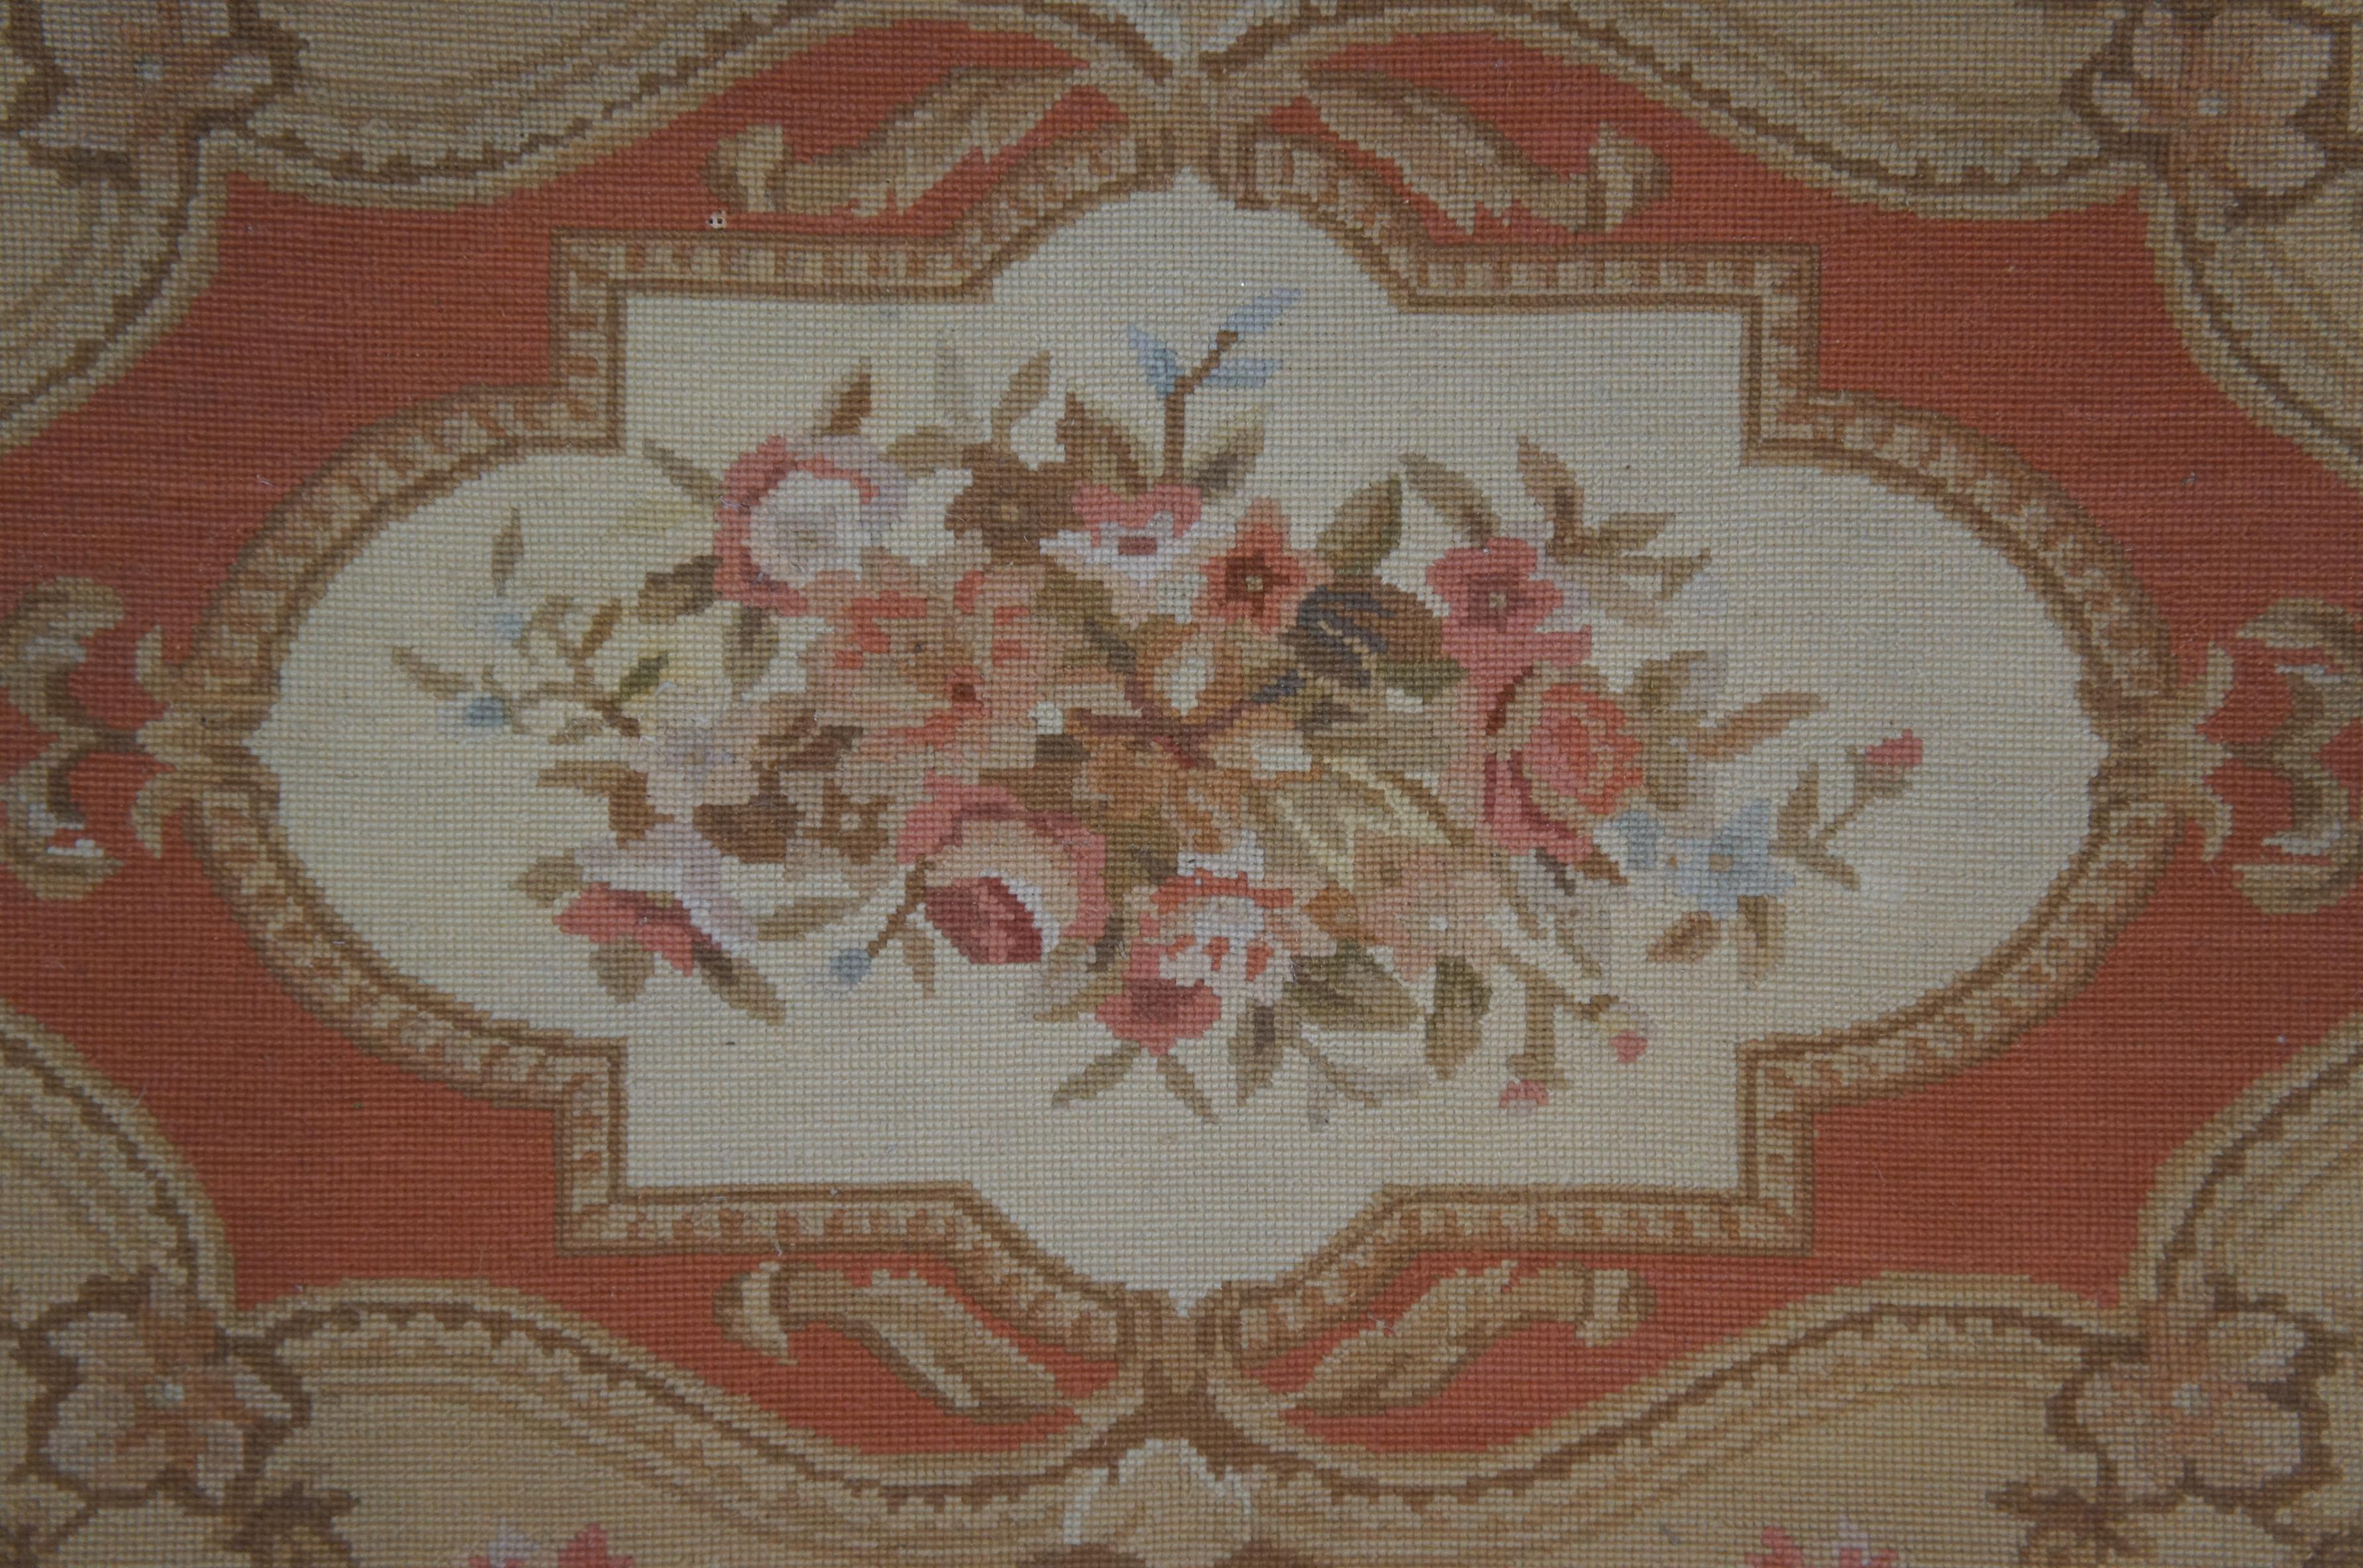 20th Century French Aubusson Floral Medallion Needlepoint Area Rug Carpet Mat 4' x 6' For Sale